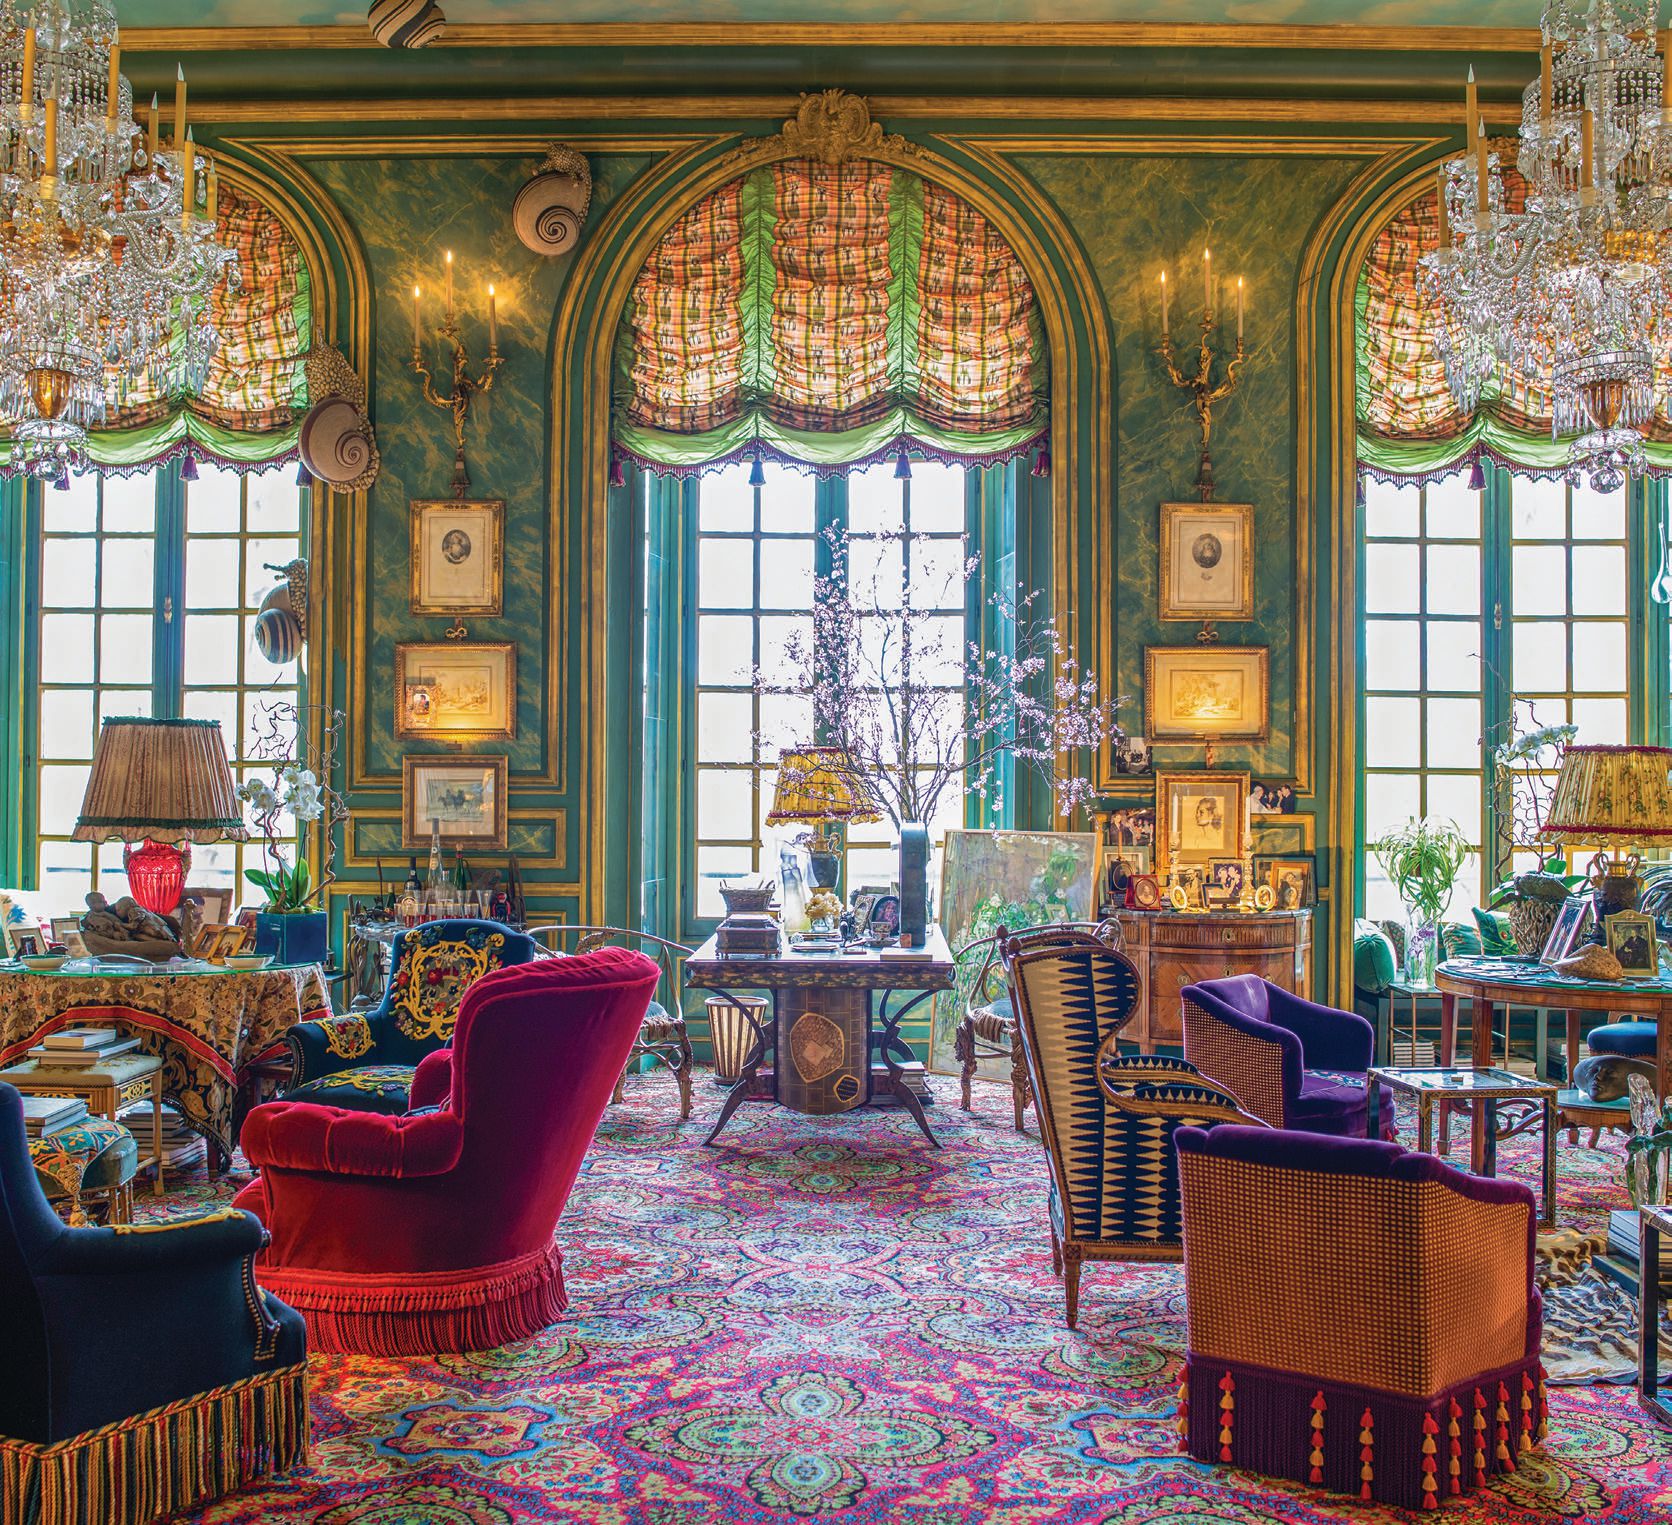 The eclectic apartment of Countess Isabelle d’Ornano on the Quai d’Orsay, on the Left Bank in Paris, is one of the spectacular private spaces featured in the book. PHOTO BY CHRISTINA VERVITSIOTI-MISSOFFE/COURTESY OF SISLEY-PARIS